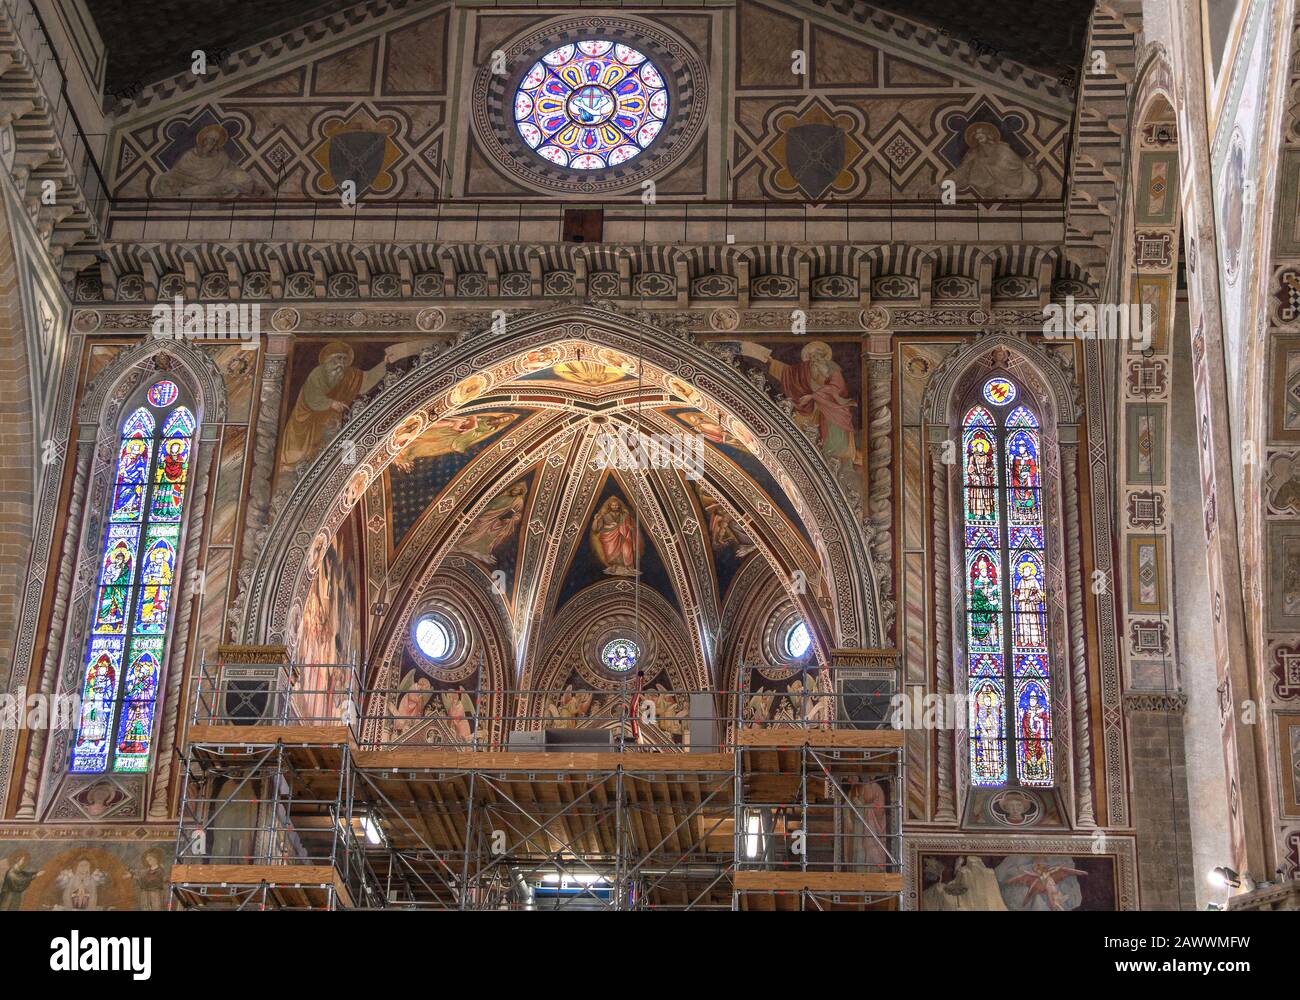 Italy.The city of Florence (Firenze).Santa Croce church.The Apse under restoration in 2013. Stock Photo